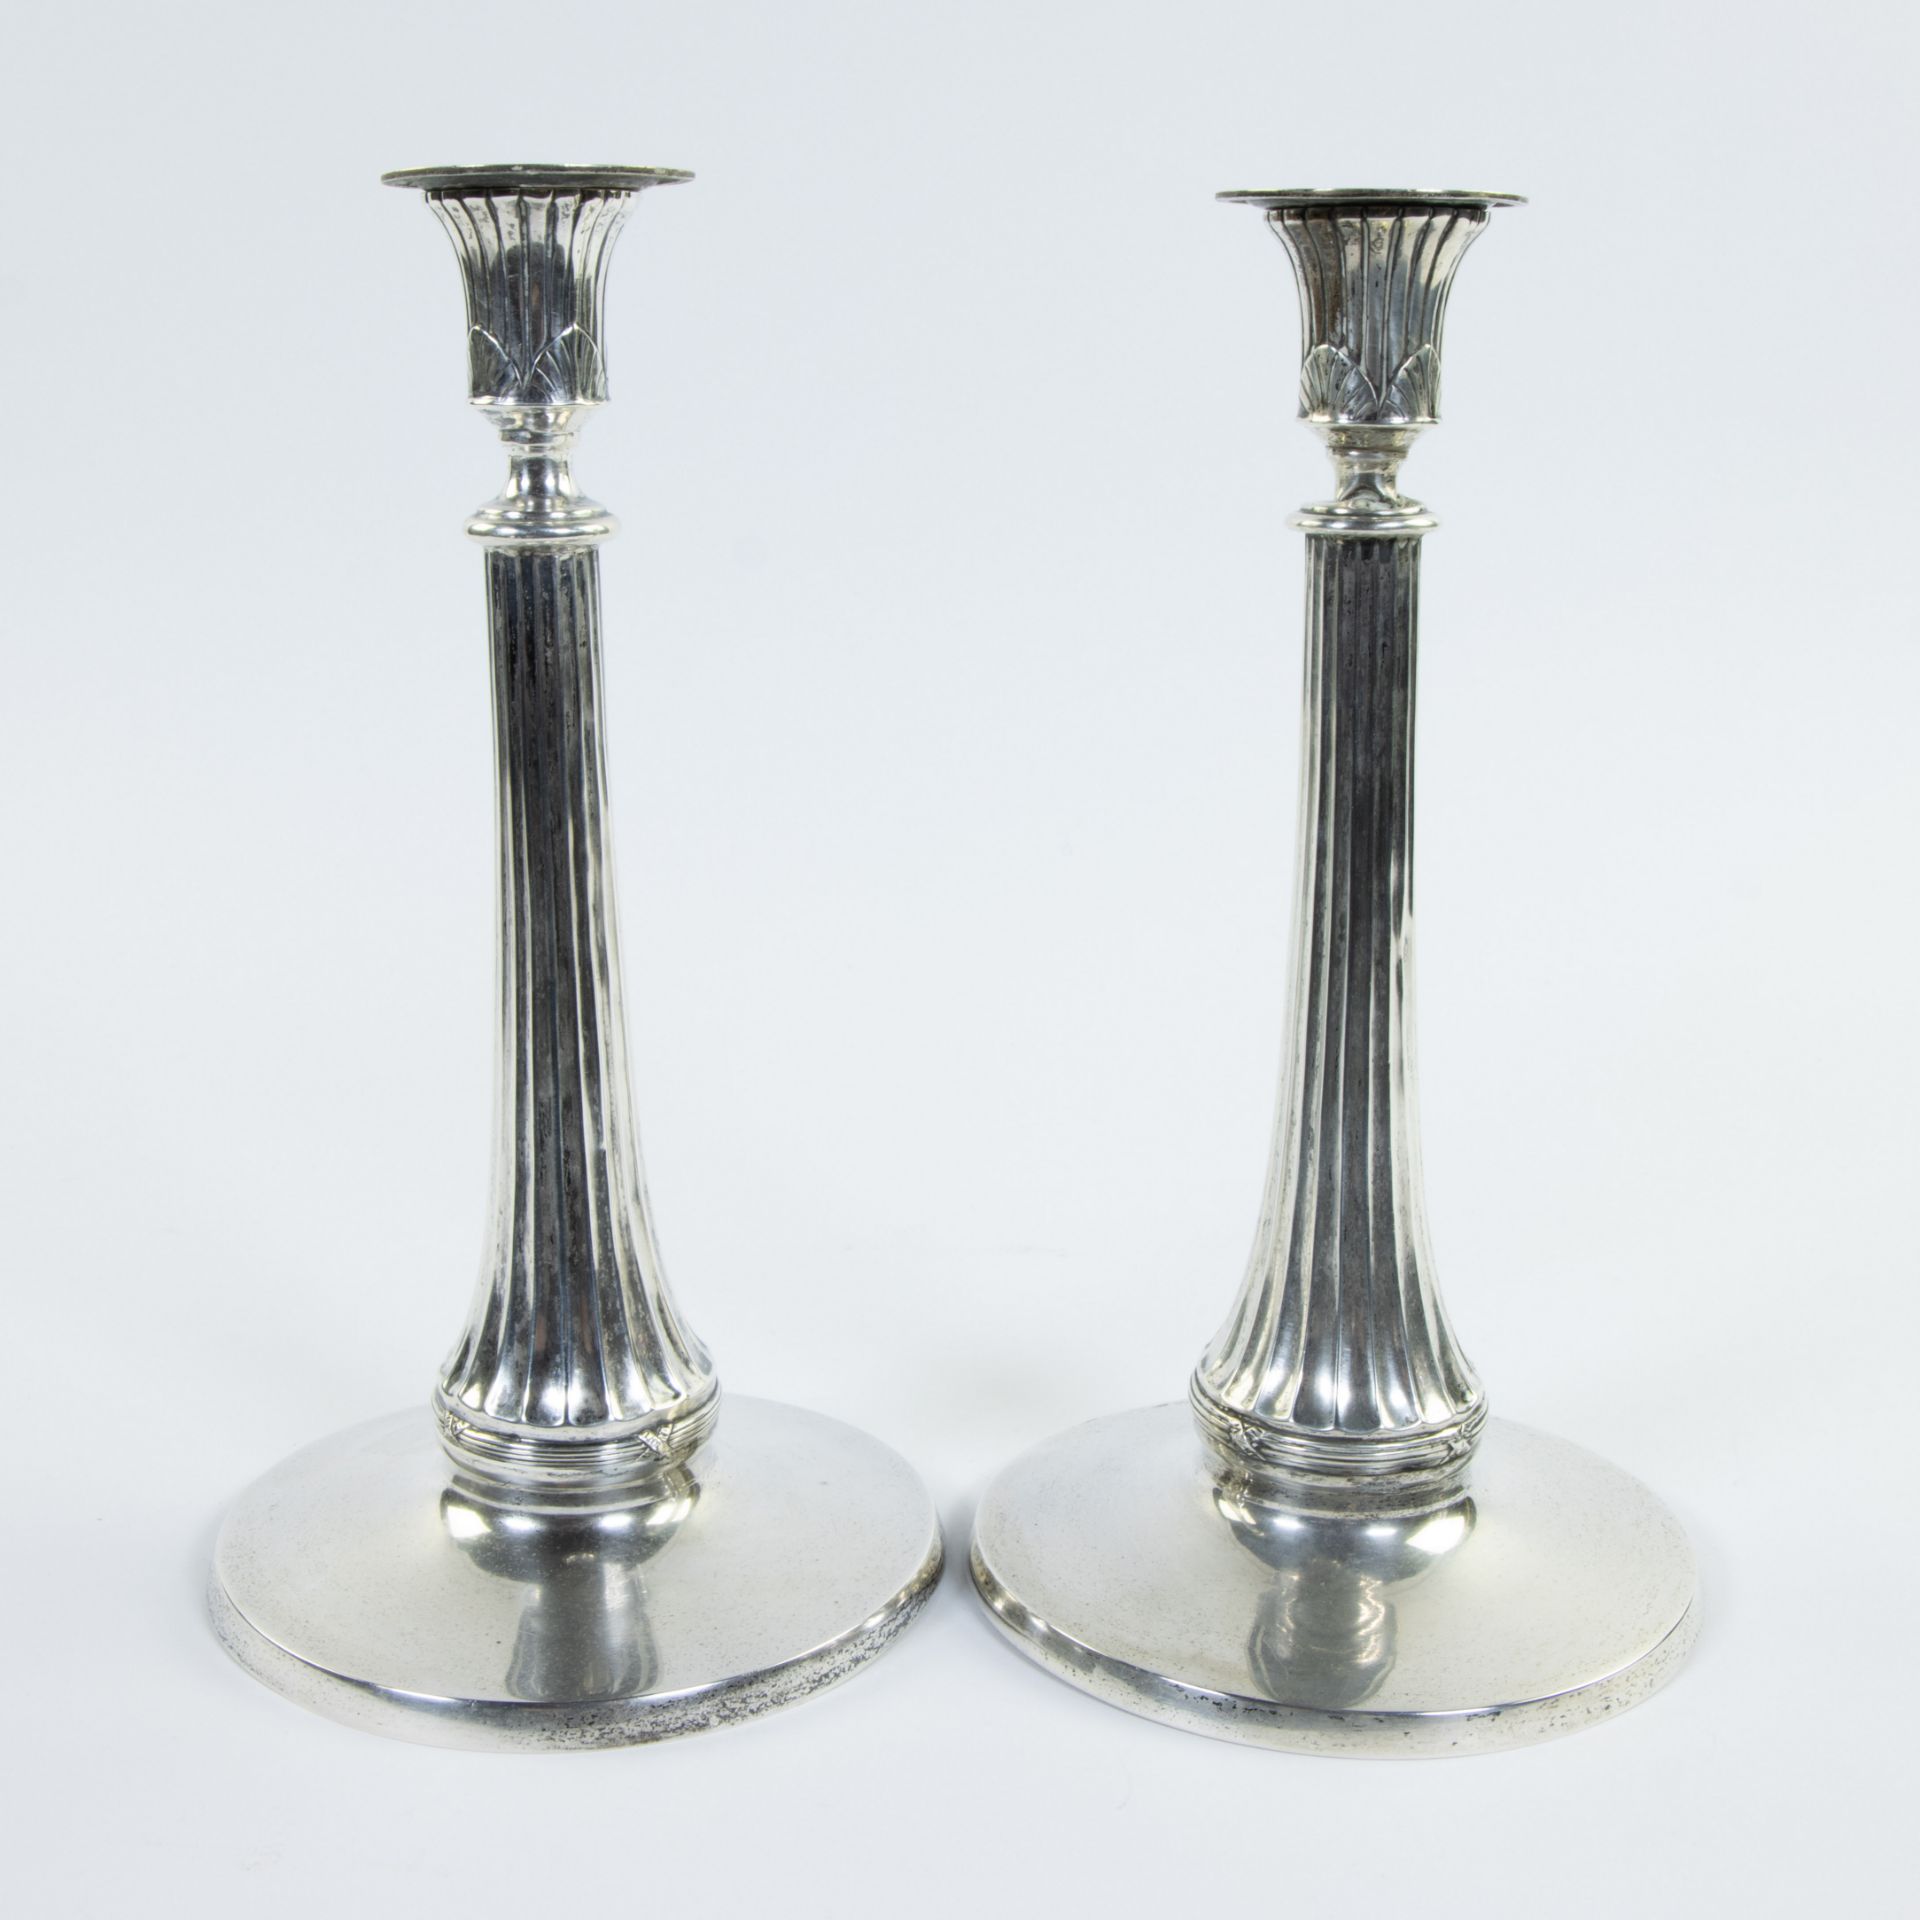 Pair of silver candlesticks, round model with contoured column with fluting, marked 800